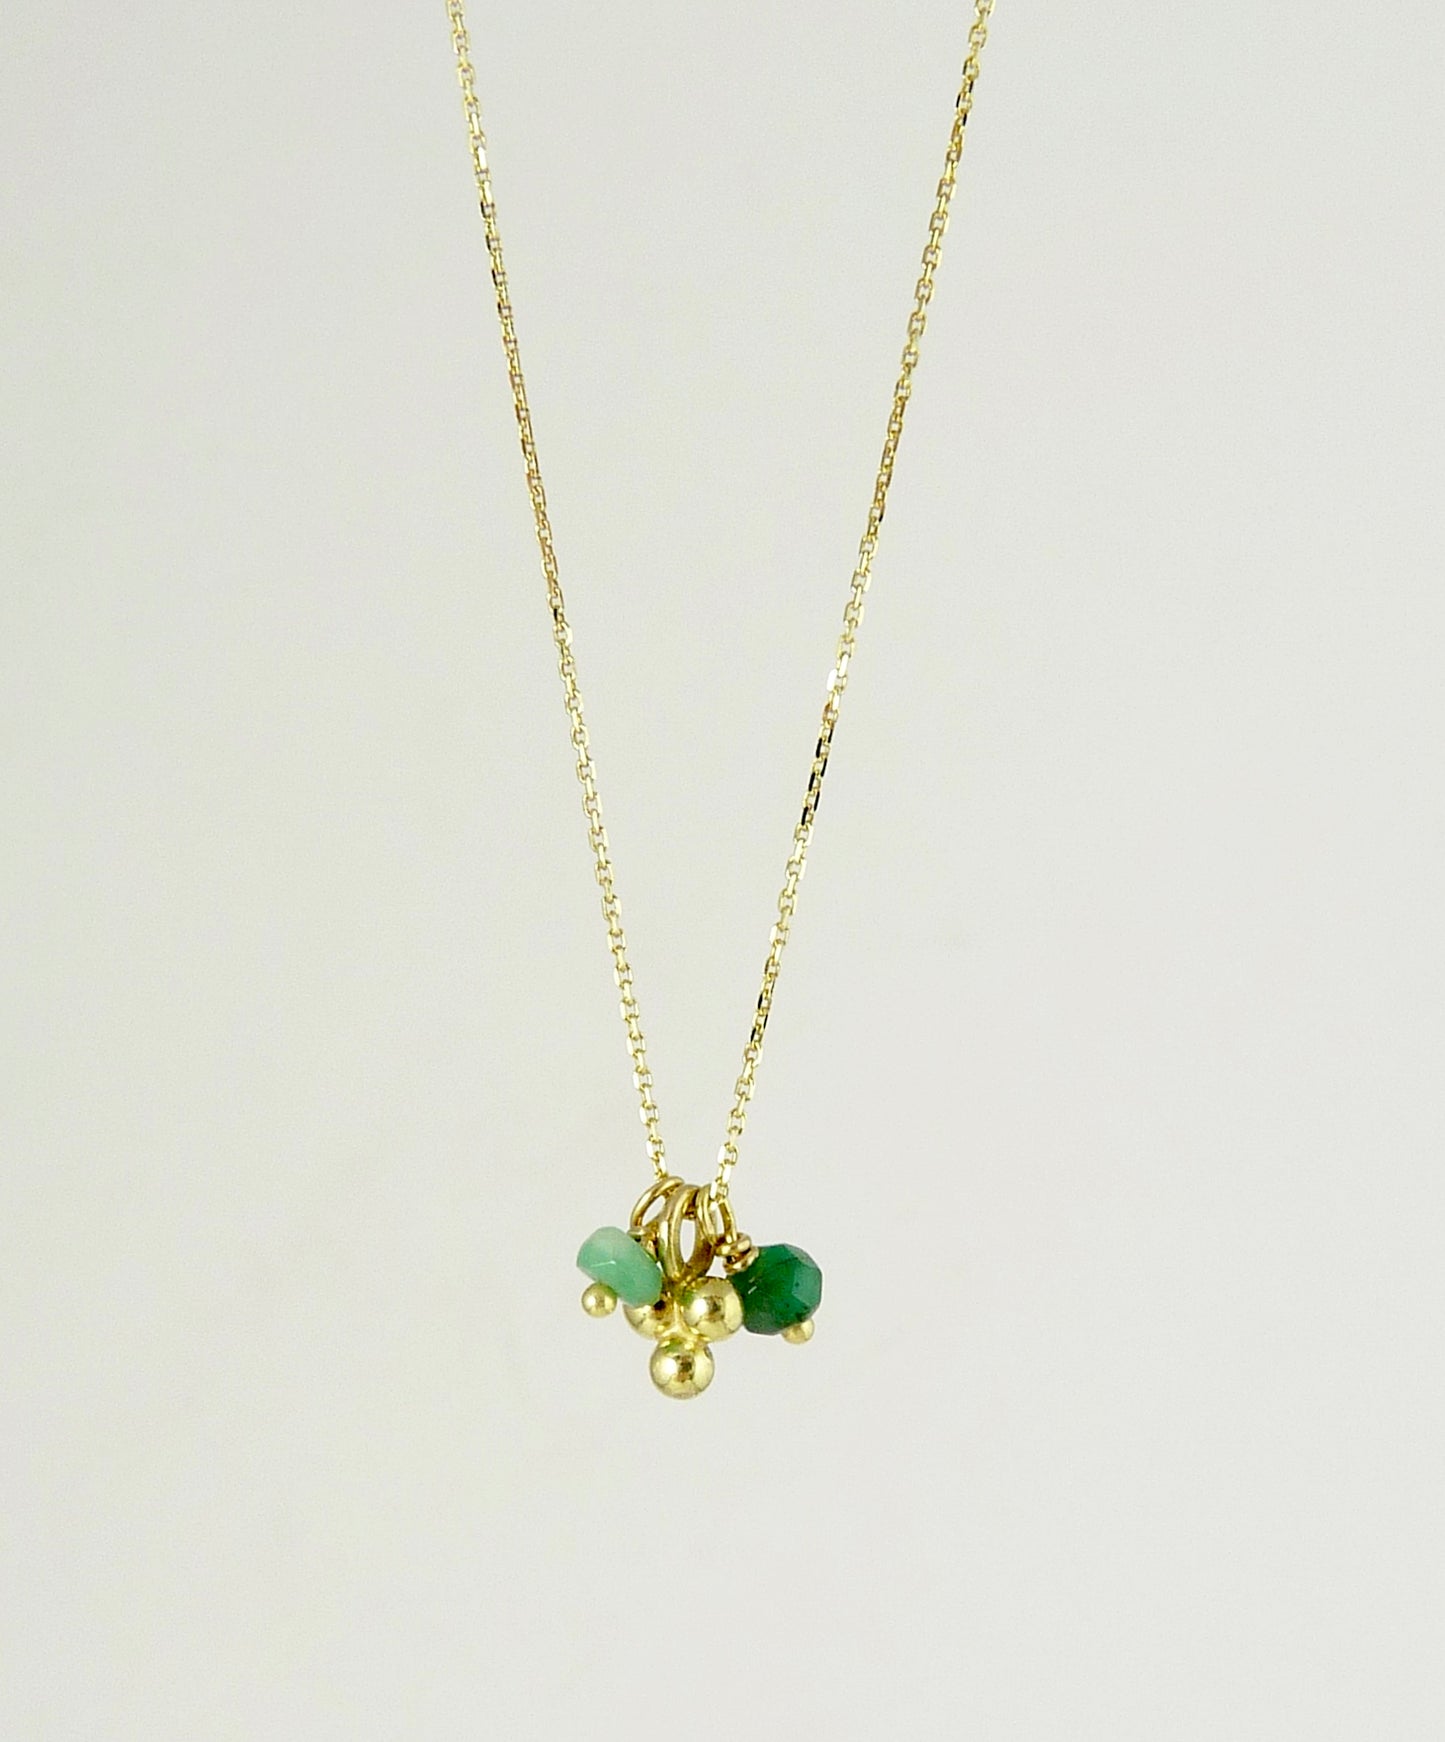 Delicate Granulation Necklace with Emerald